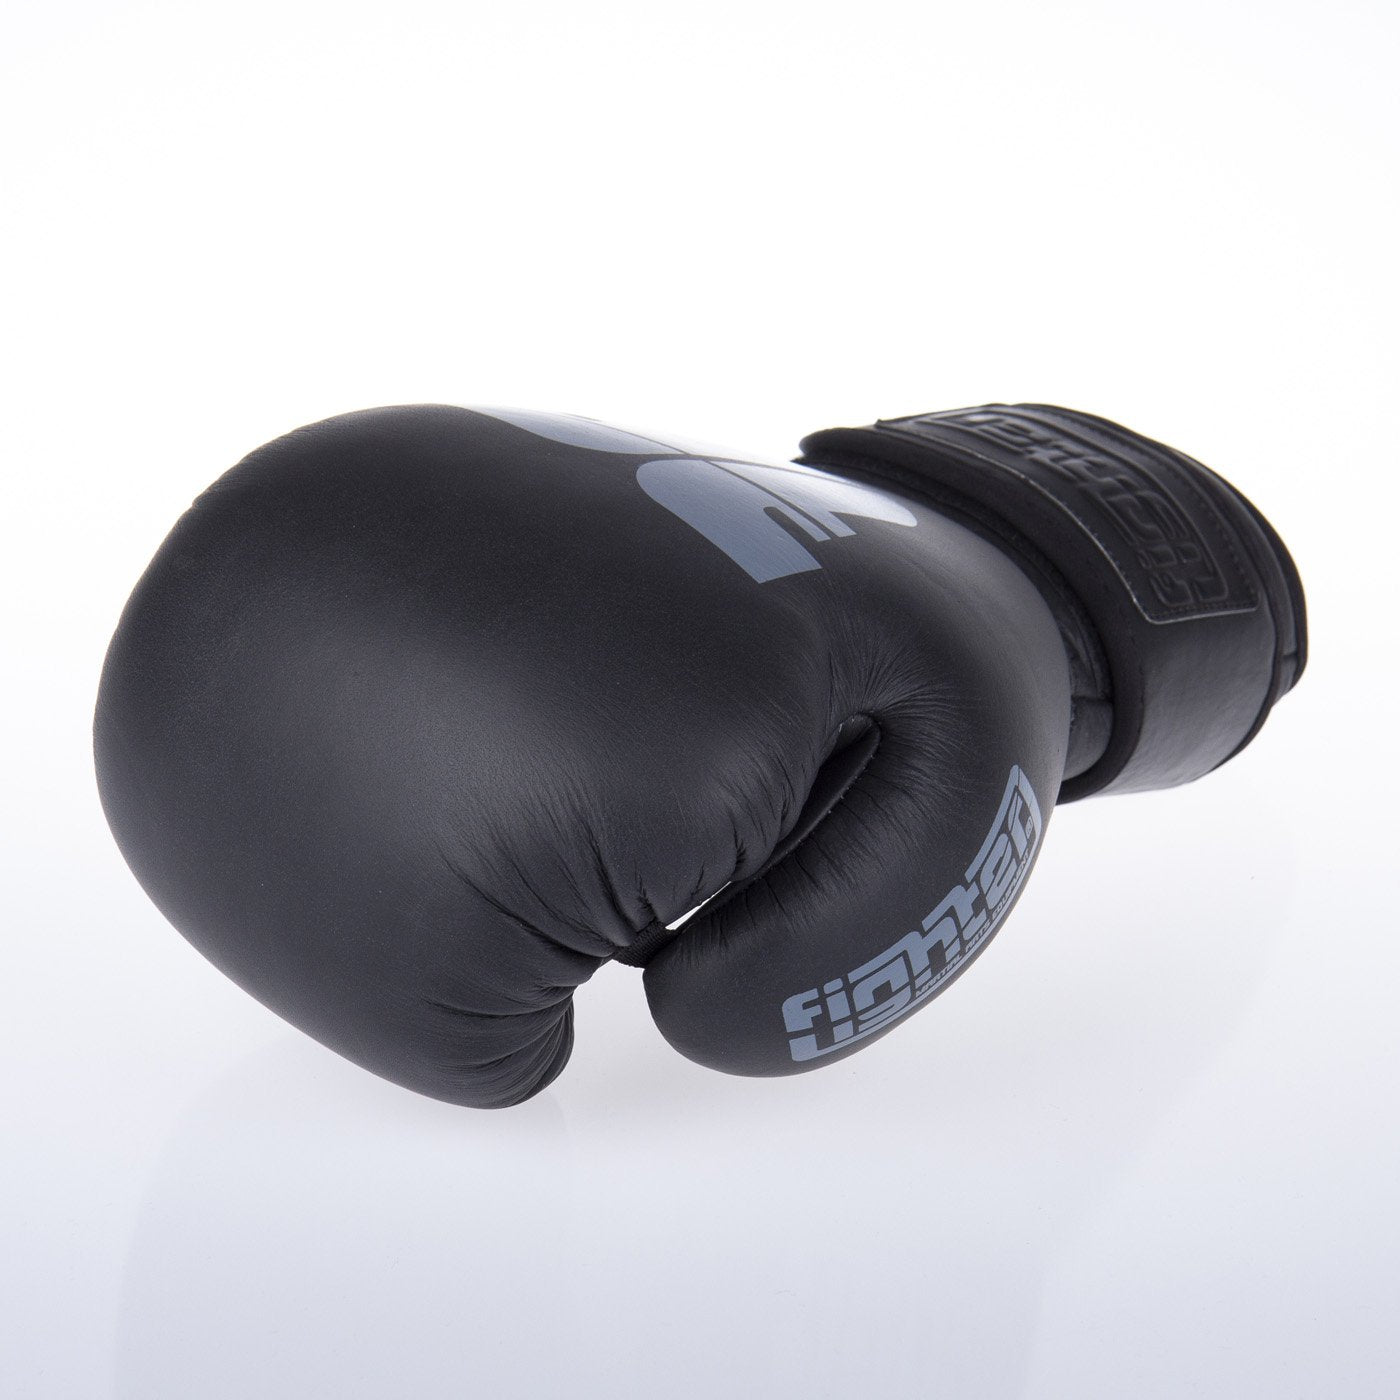 Fighter Boxing Gloves SIAM - black